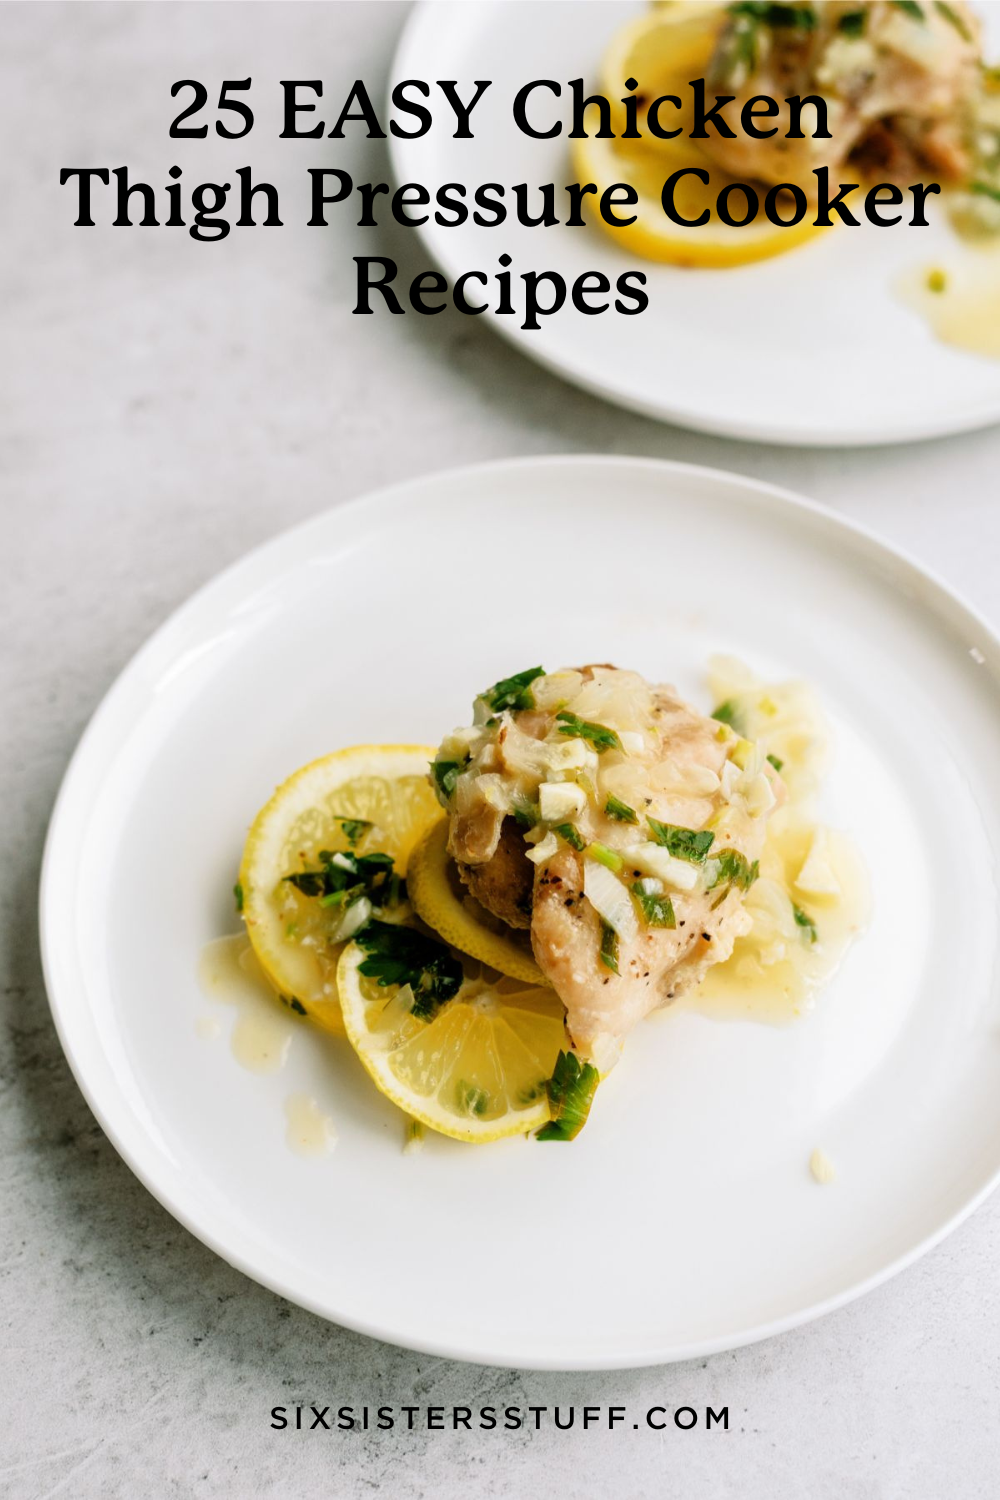 25 EASY Chicken Thigh Pressure Cooker Recipes